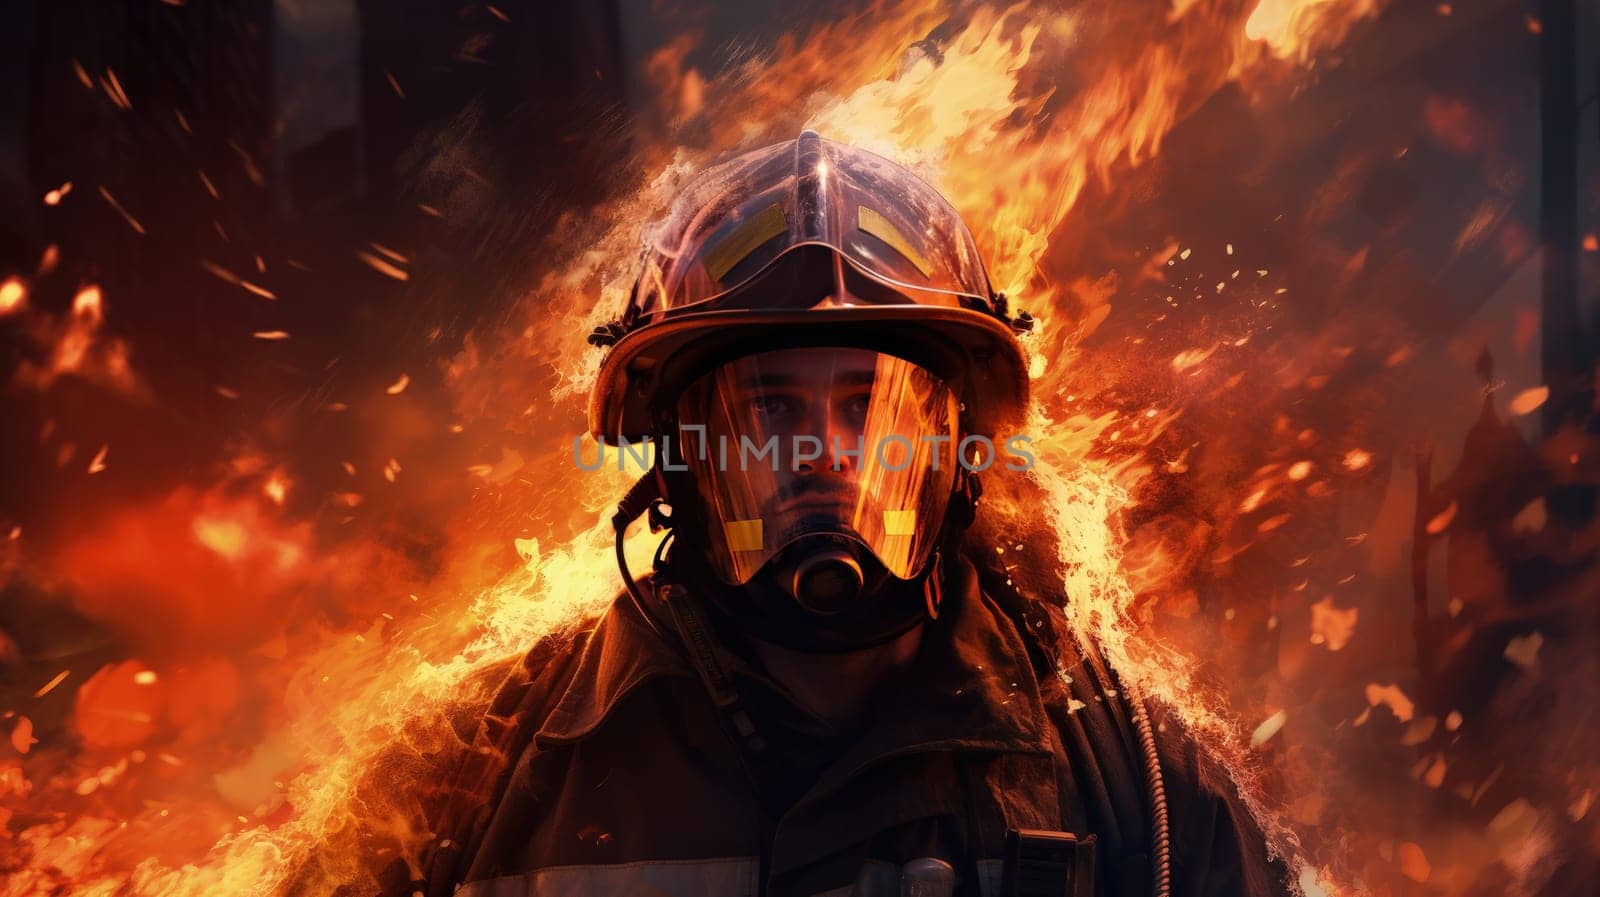 A courageous firefighter engulfed in the intense heat and flames of a raging fire, bravely battling the inferno with determined eyes and protective gear